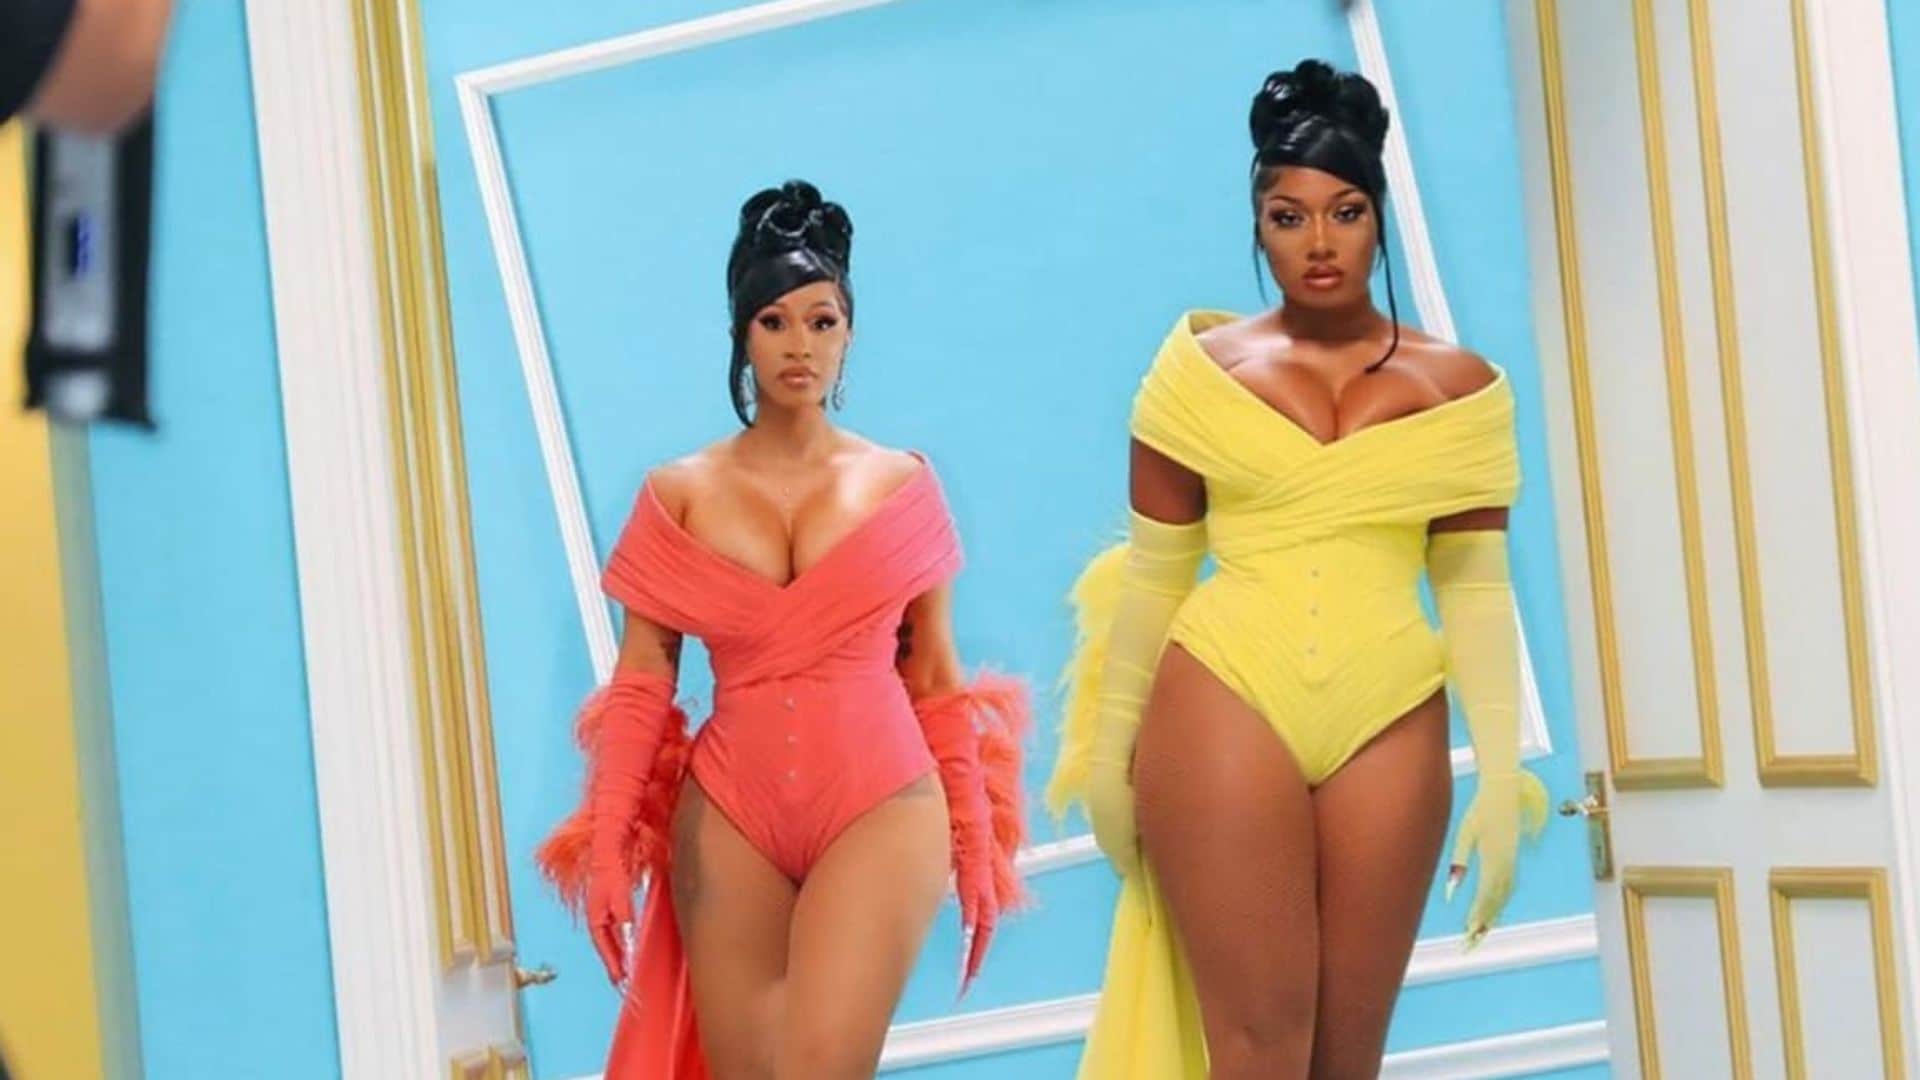 Cardi B and Megan Thee Stallion’s song “WAP” is one of the most successful collaborations in music history